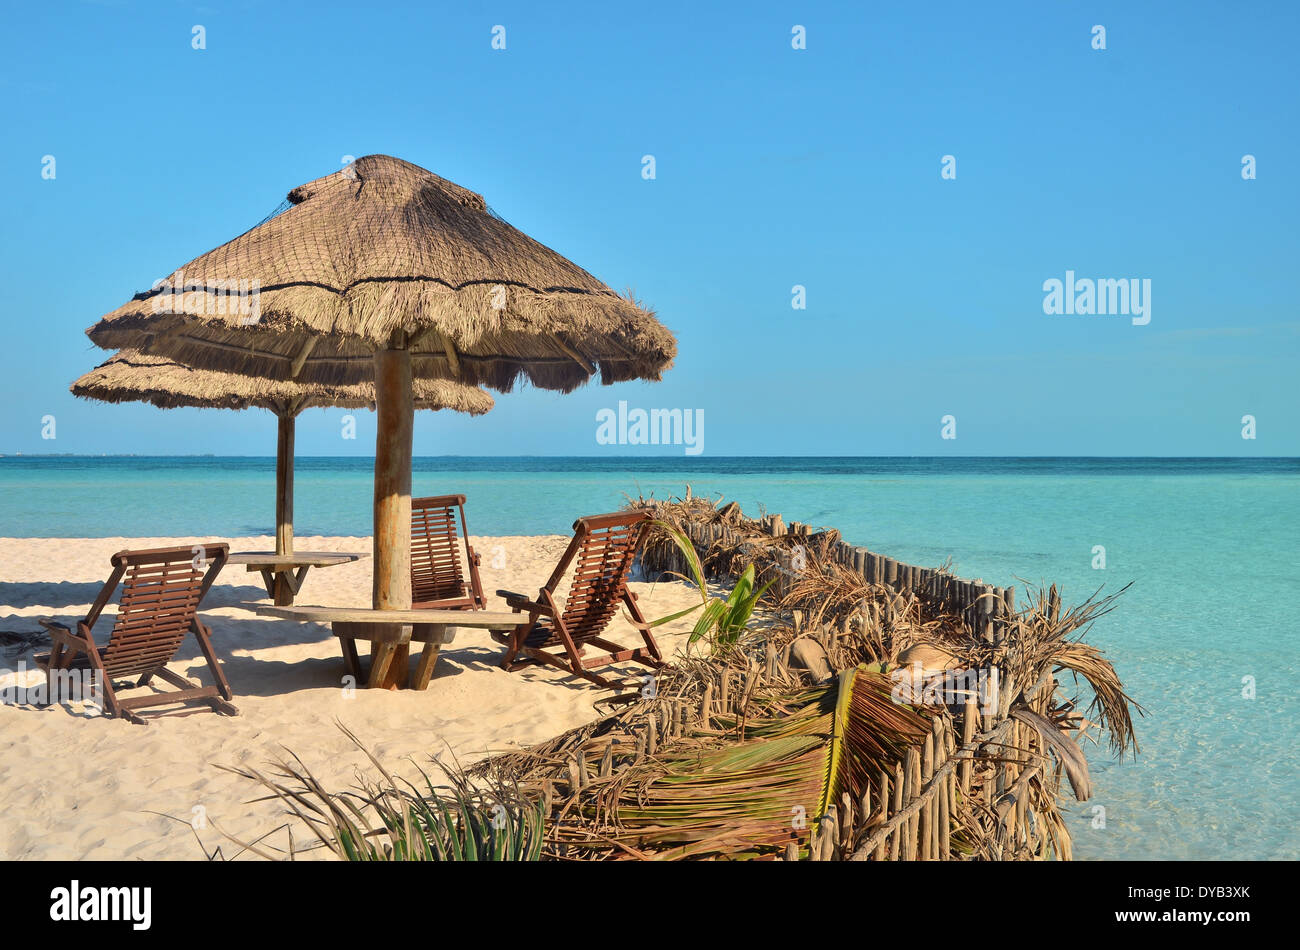 Chairs and umbrella on a beach with shadow from palm tree Stock Photo